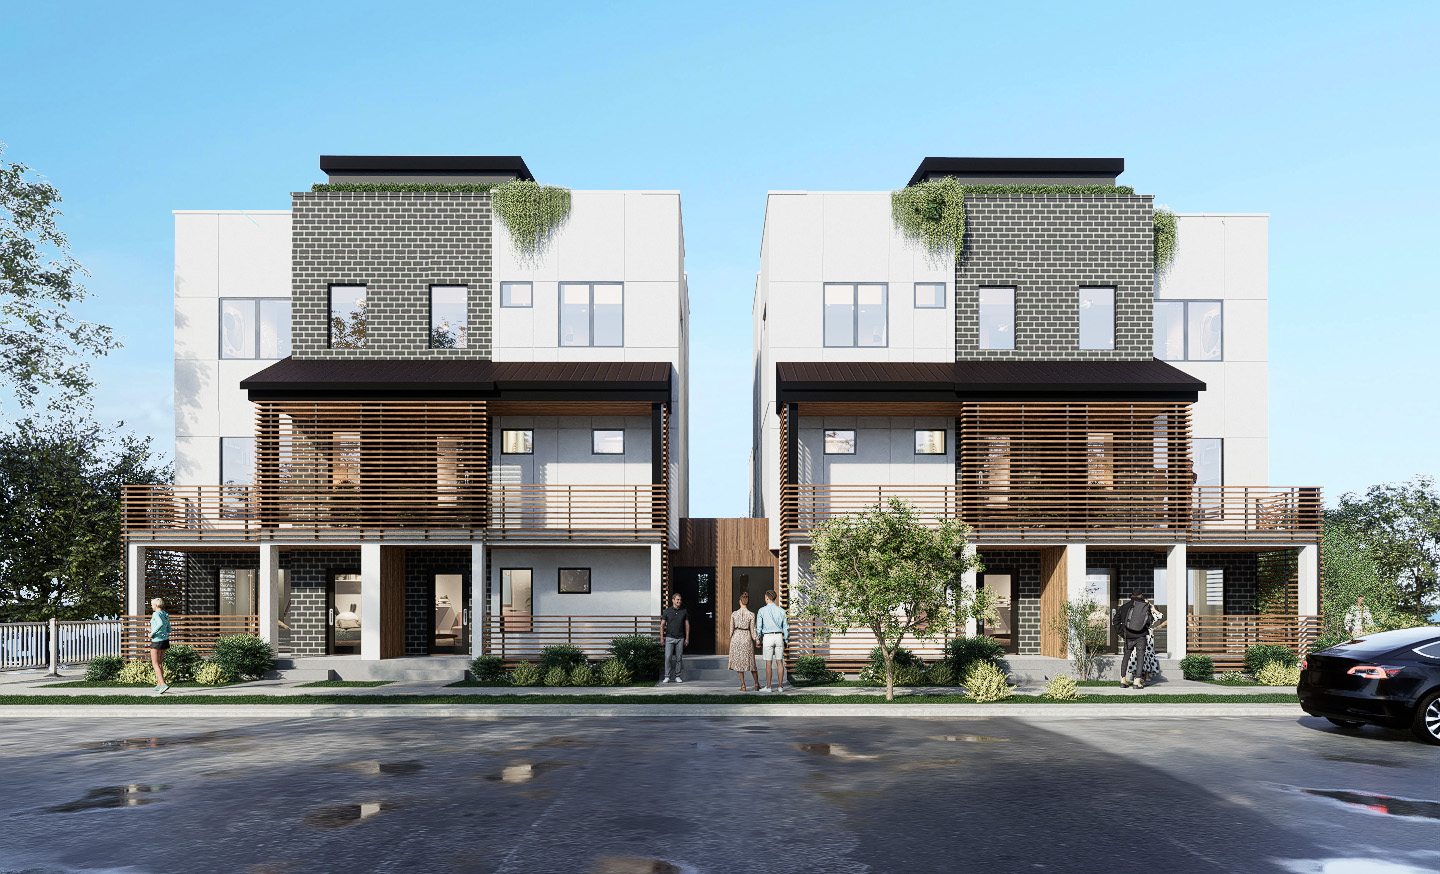 Overland Riverside Townhomes -#1 of Top Single Family Home builders & Multi-family residential, mixed-Use & commercial real estate developers in Denver, Colorado - Weins Development Group.